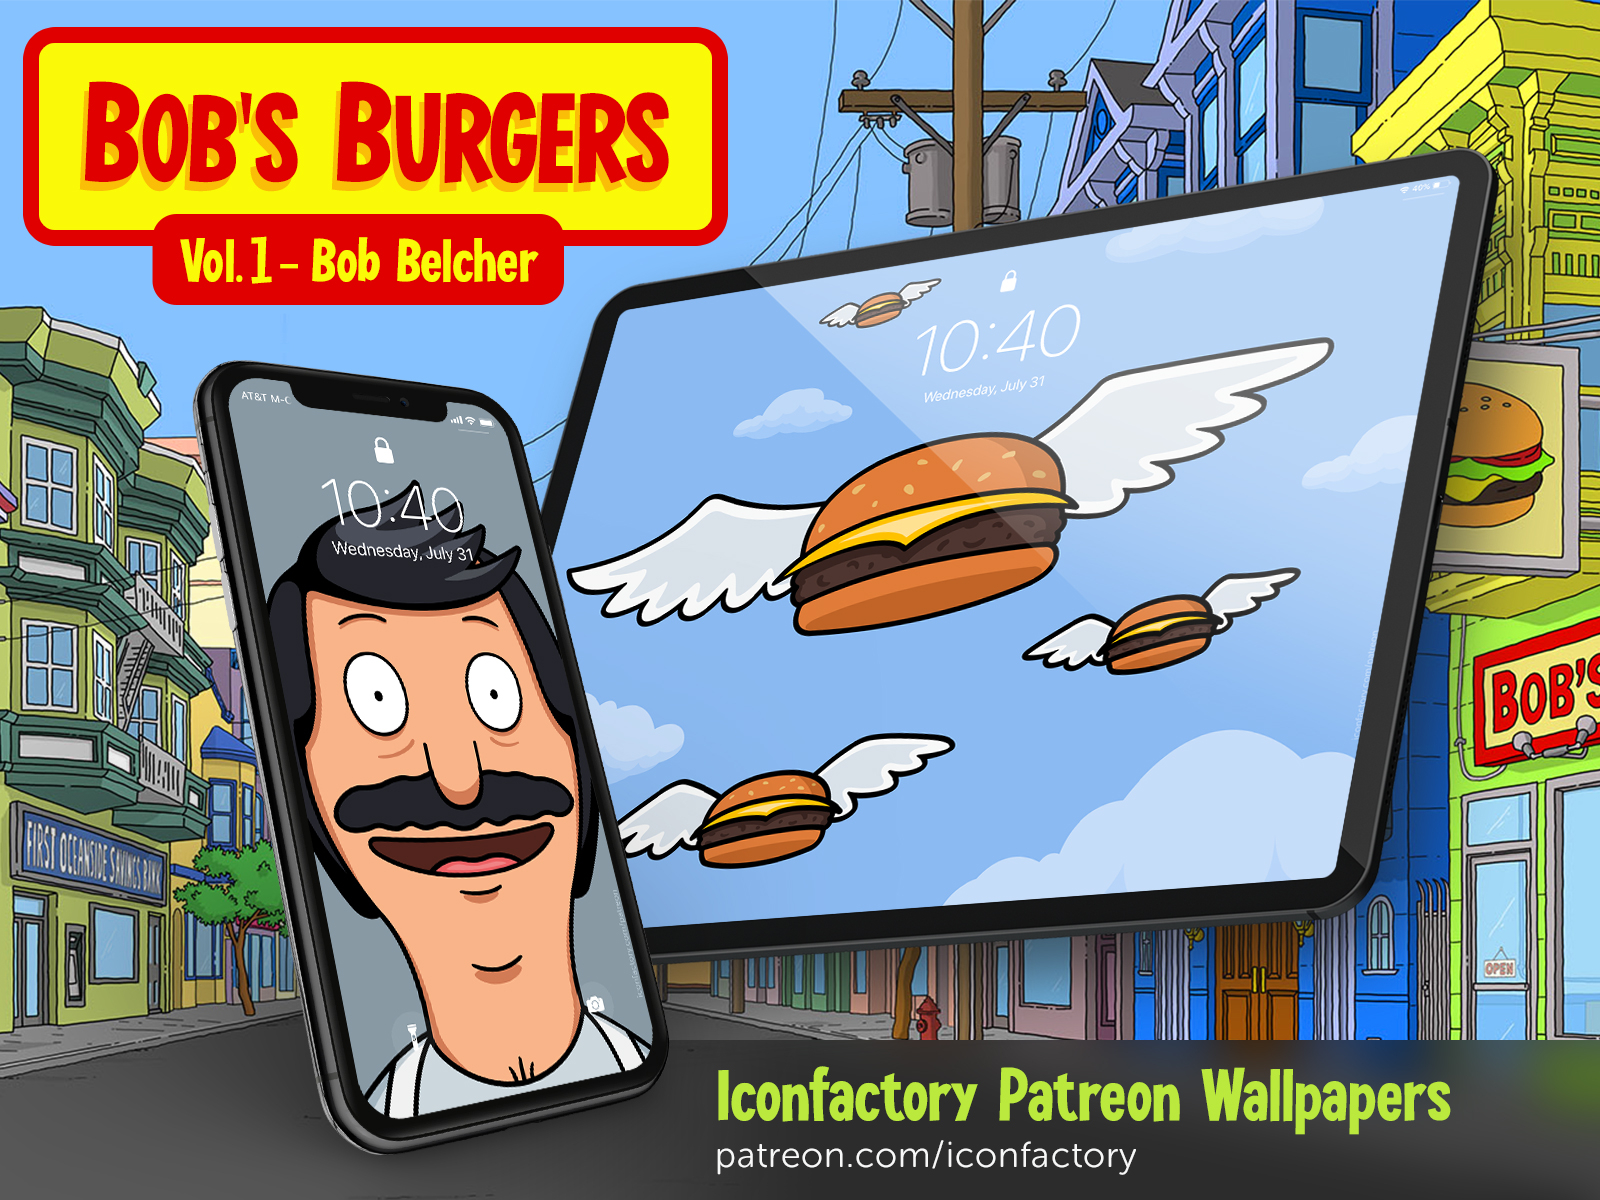 Bobs Burgers Wallpapers  Top Free Bobs Burgers Backgrounds   WallpaperAccess